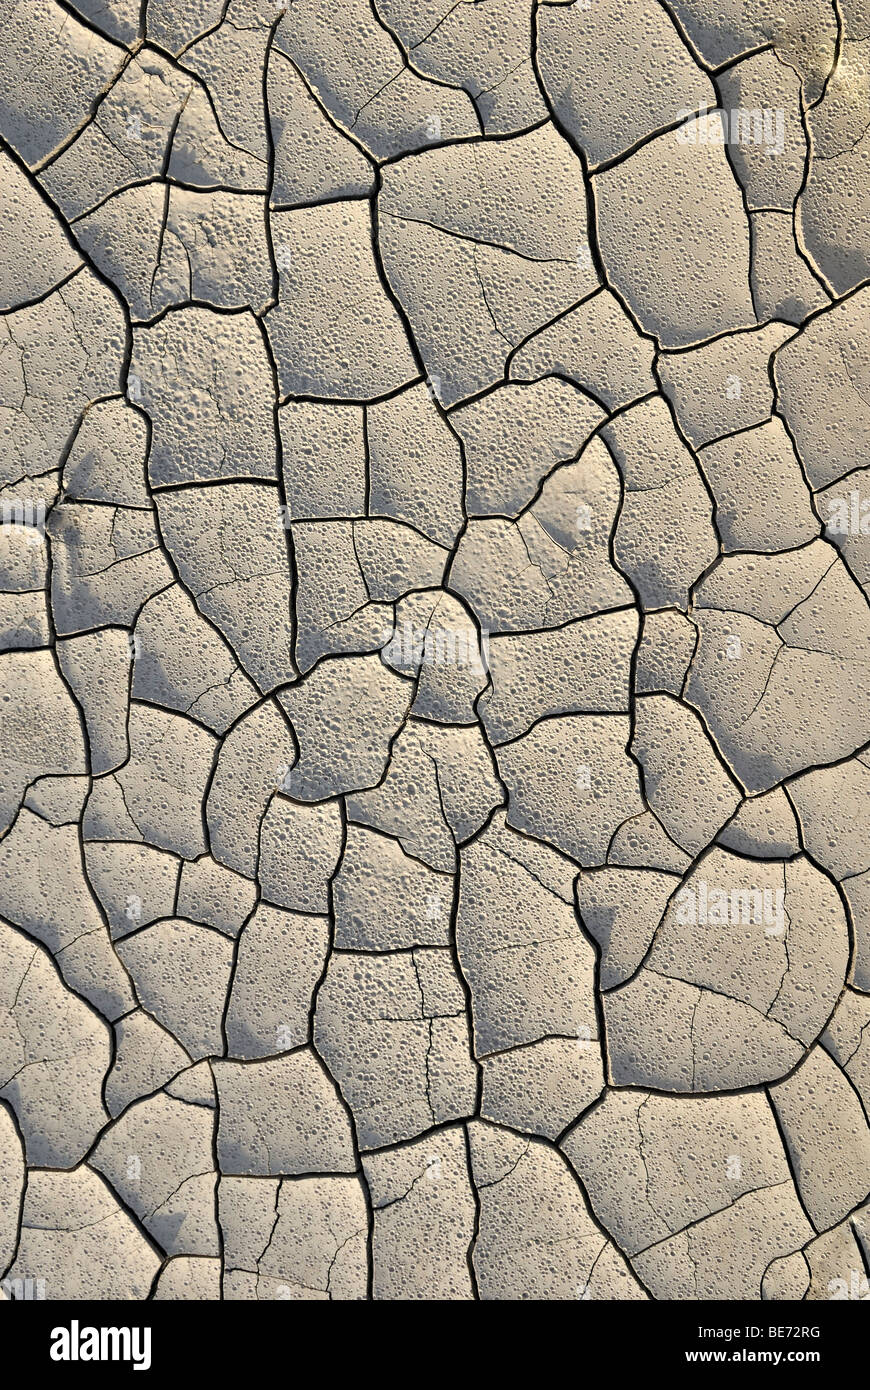 Dried mud puddle with dry cracks and traces of rain drops, Highway 24 near Caineville, Utah, USA Stock Photo